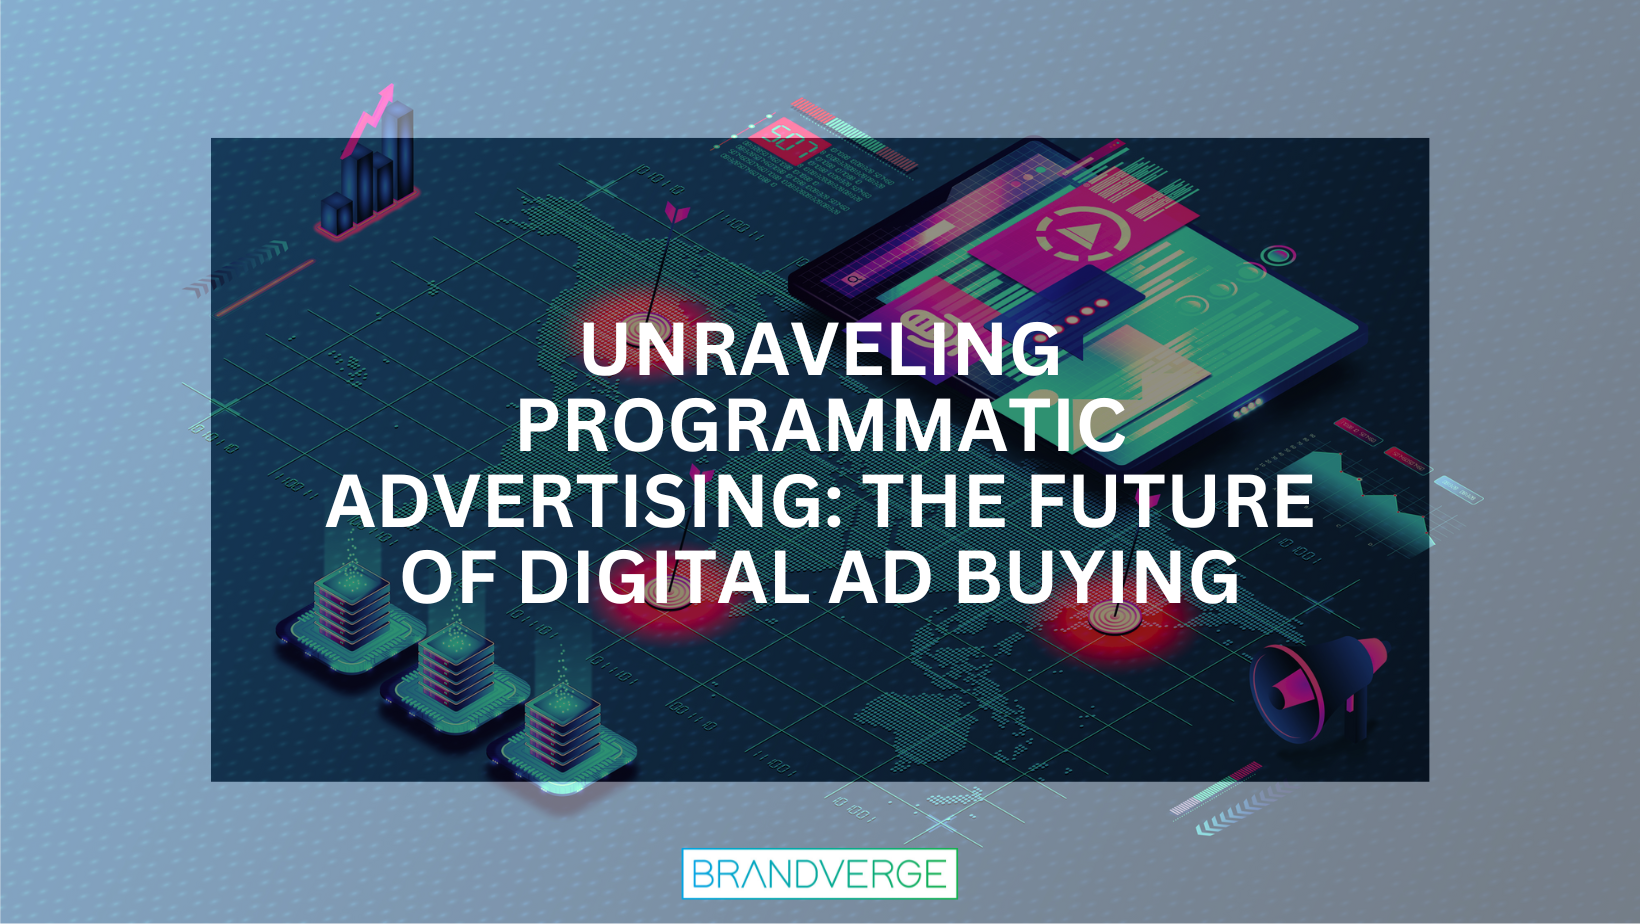 Unraveling Programmatic Advertising: The Future of Digital Ad Buying